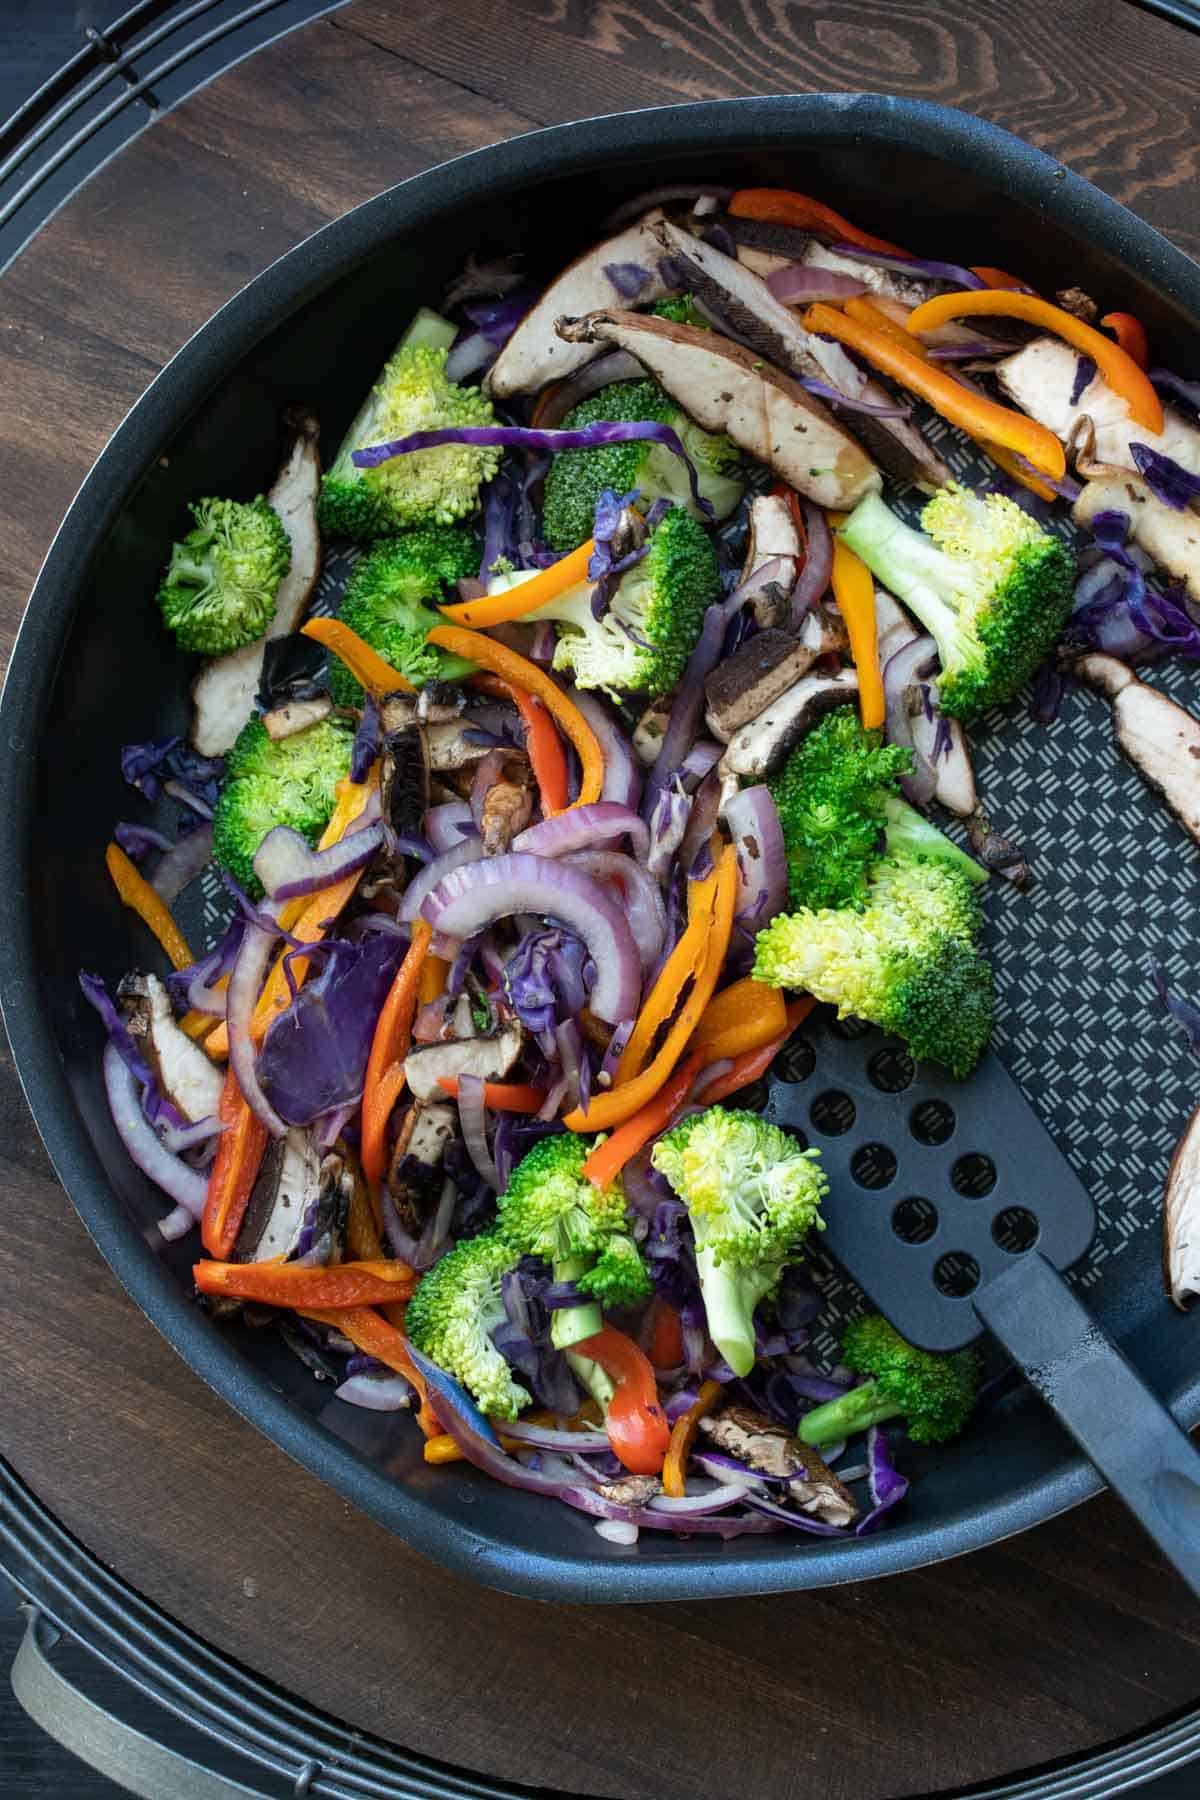 Spatula mixing colorful sliced veggies in a black pan.